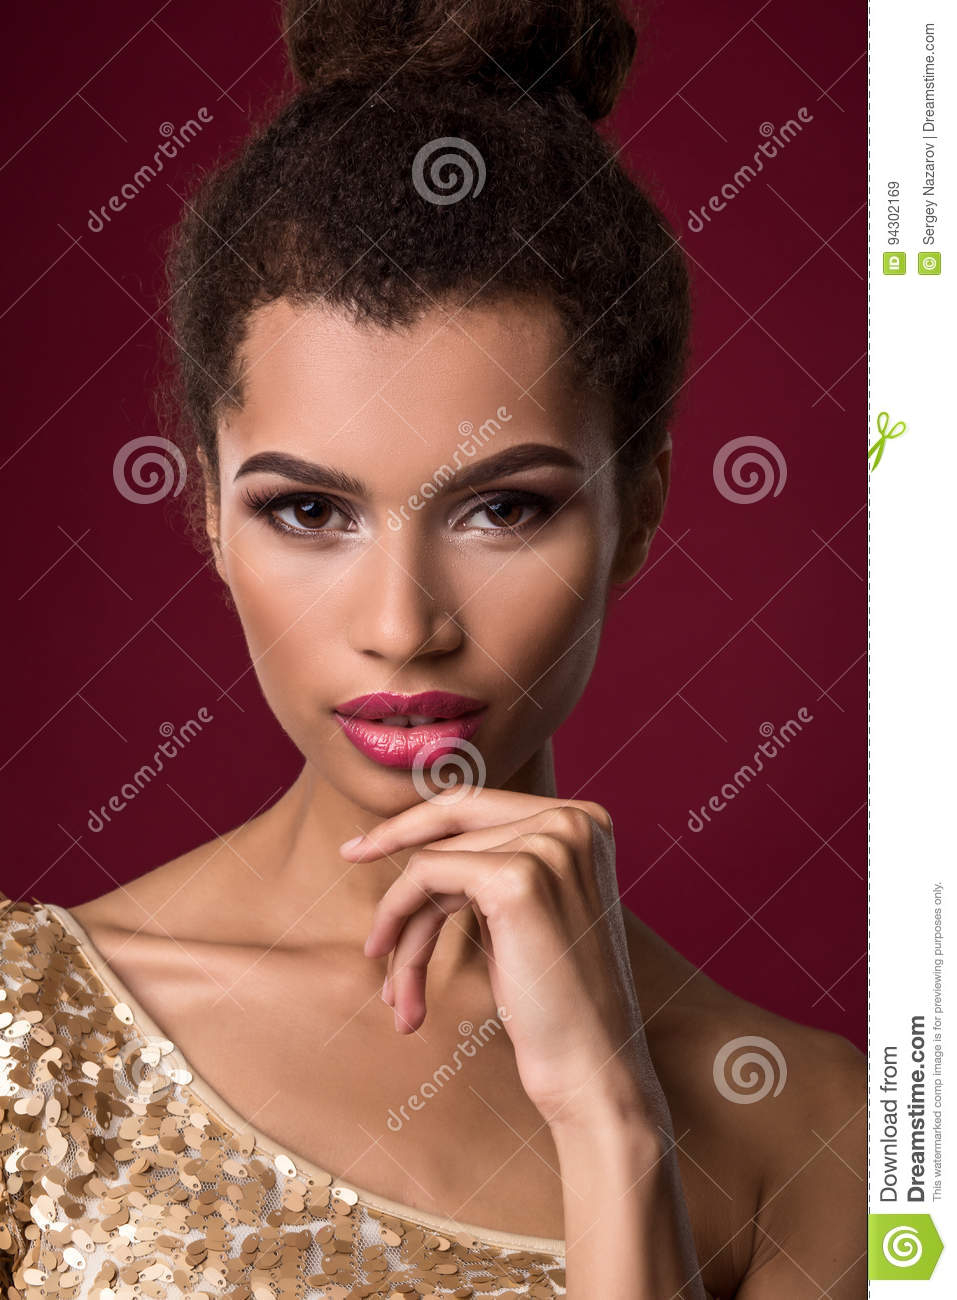 Eye Makeup For A Gold Dress Fashion Young African Woman With Make Up In Gold Dress Stock Image